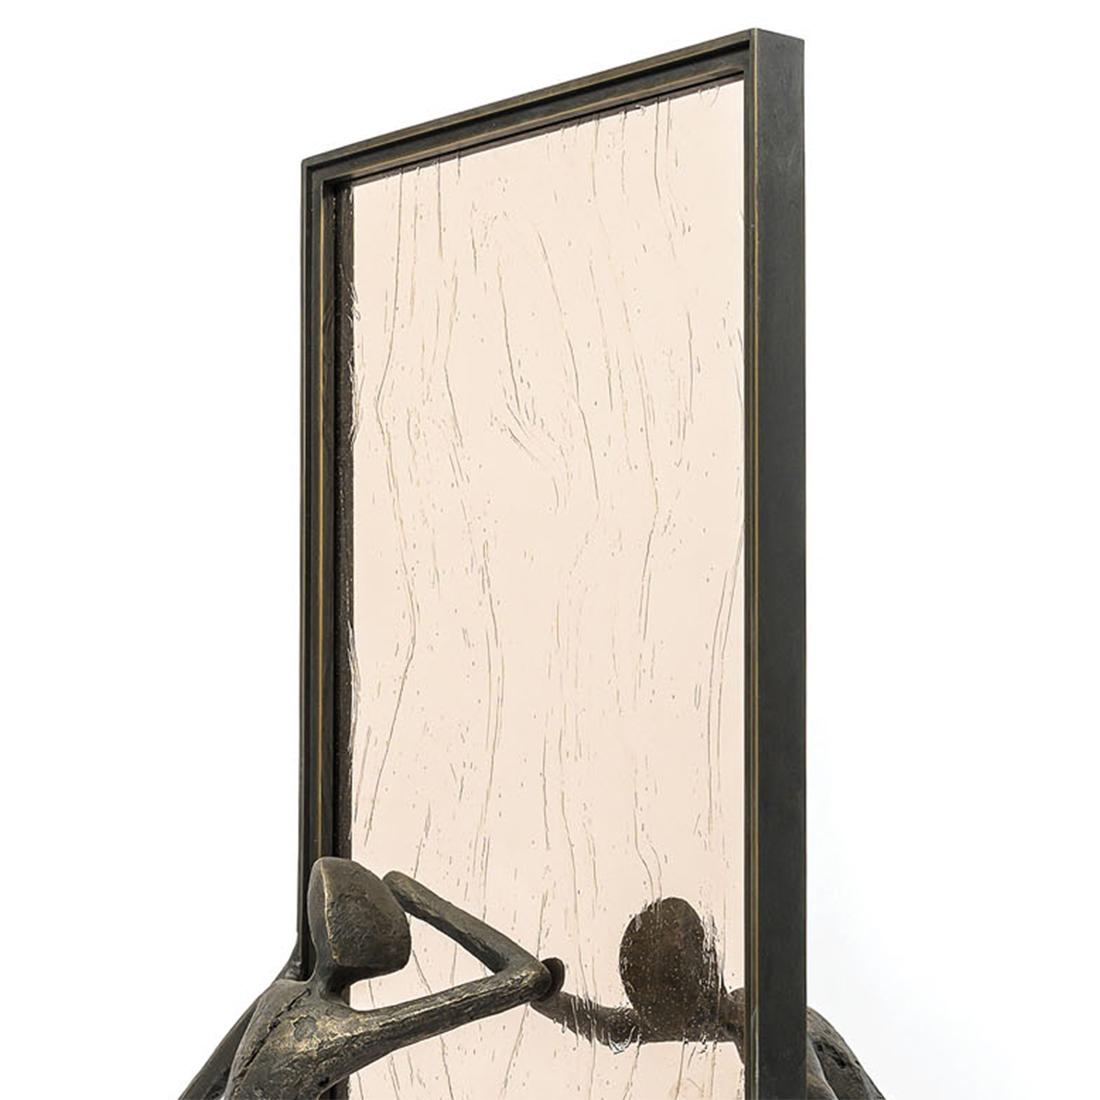 Sculpture Consciousness bronze with all structure in
Solid bronze and with mirror glass inside the bronze frame.